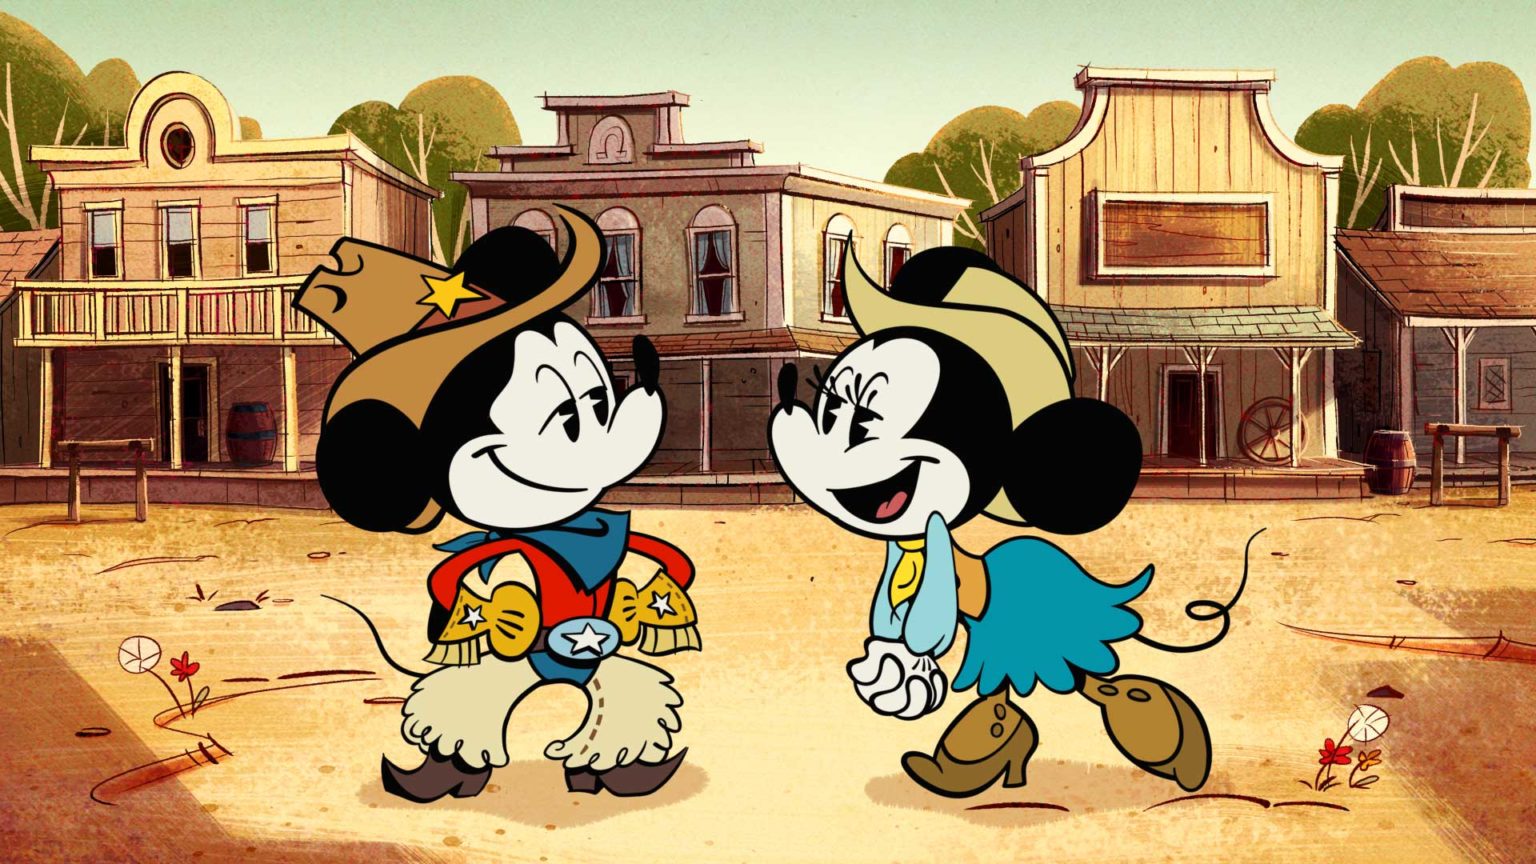 New Series "The Wonderful World of Mickey Mouse" Streaming on Disney+